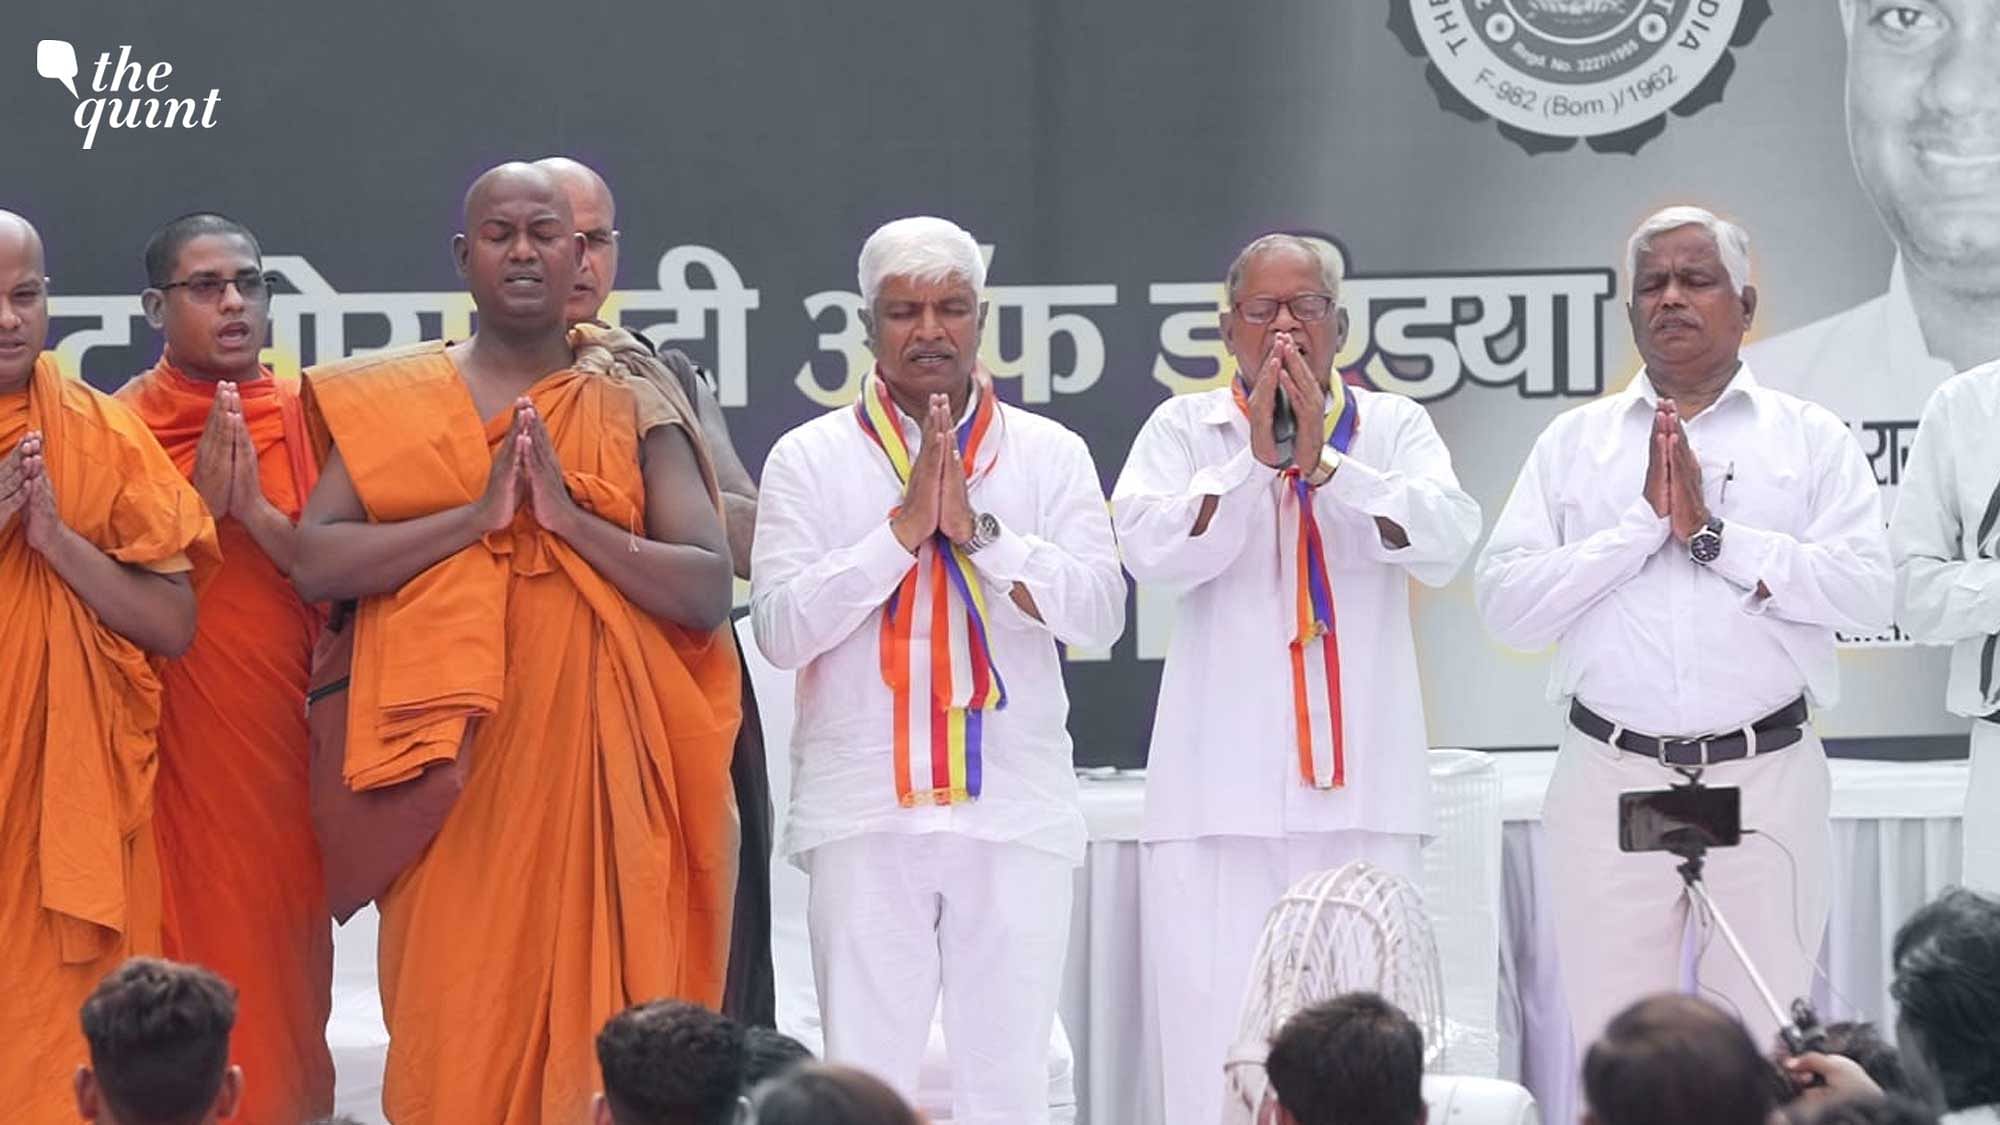 <div class="paragraphs"><p>Rajratna Ambedkar, Rajendra Pal Gautam and others at conversion to Buddhism ceremony in Delhi on 5 October.</p></div>